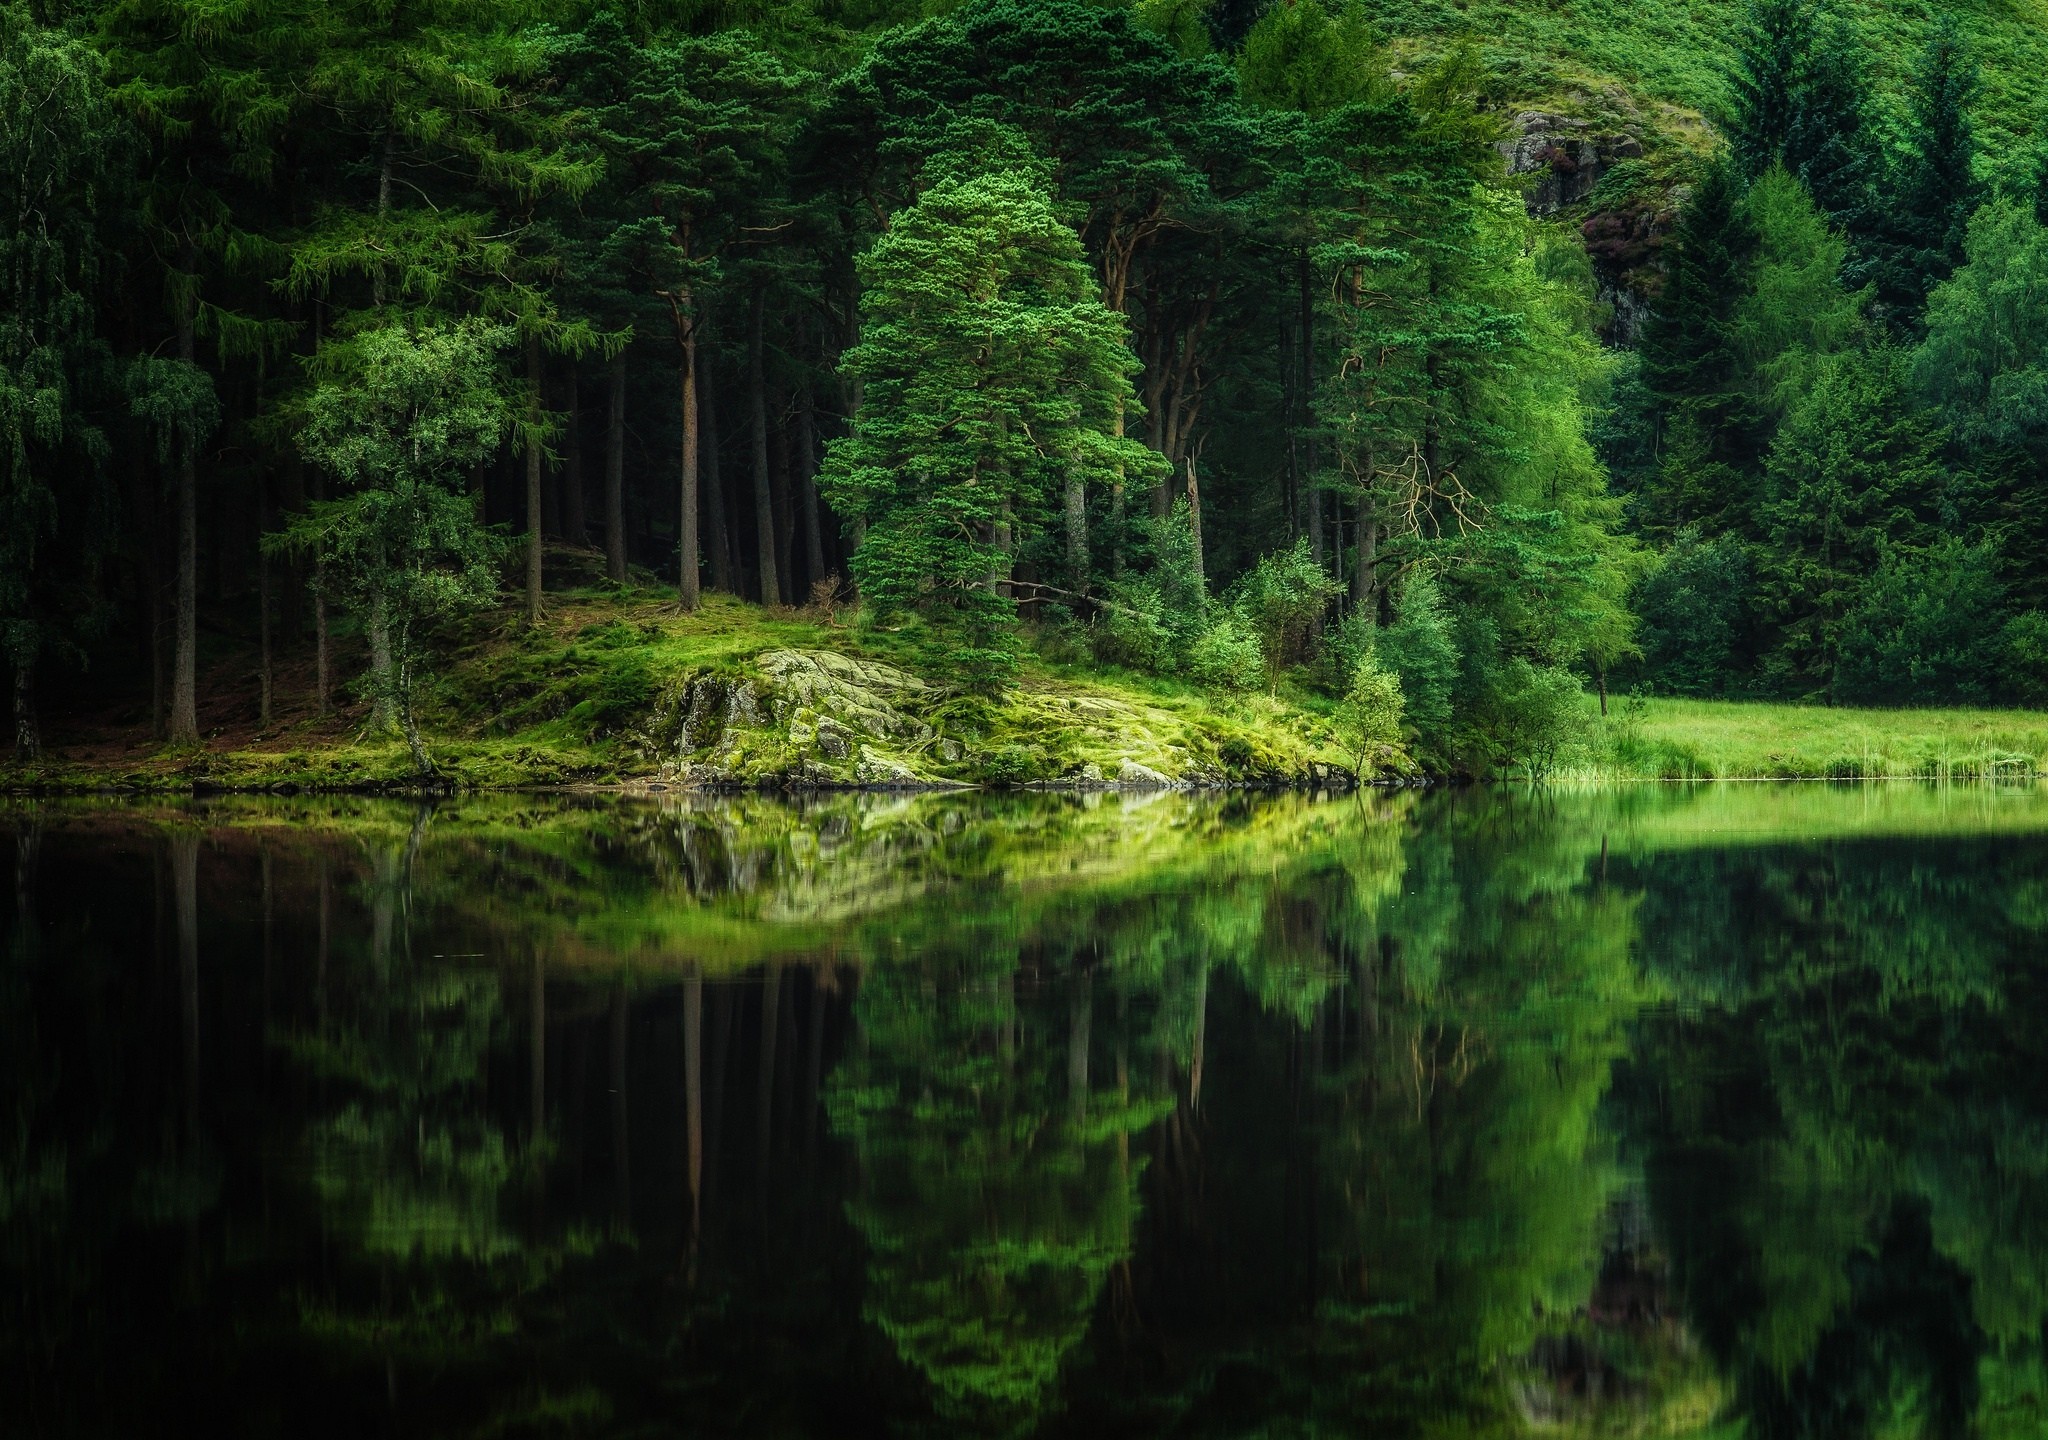 General 2048x1440 trees lake nature reflection outdoors water